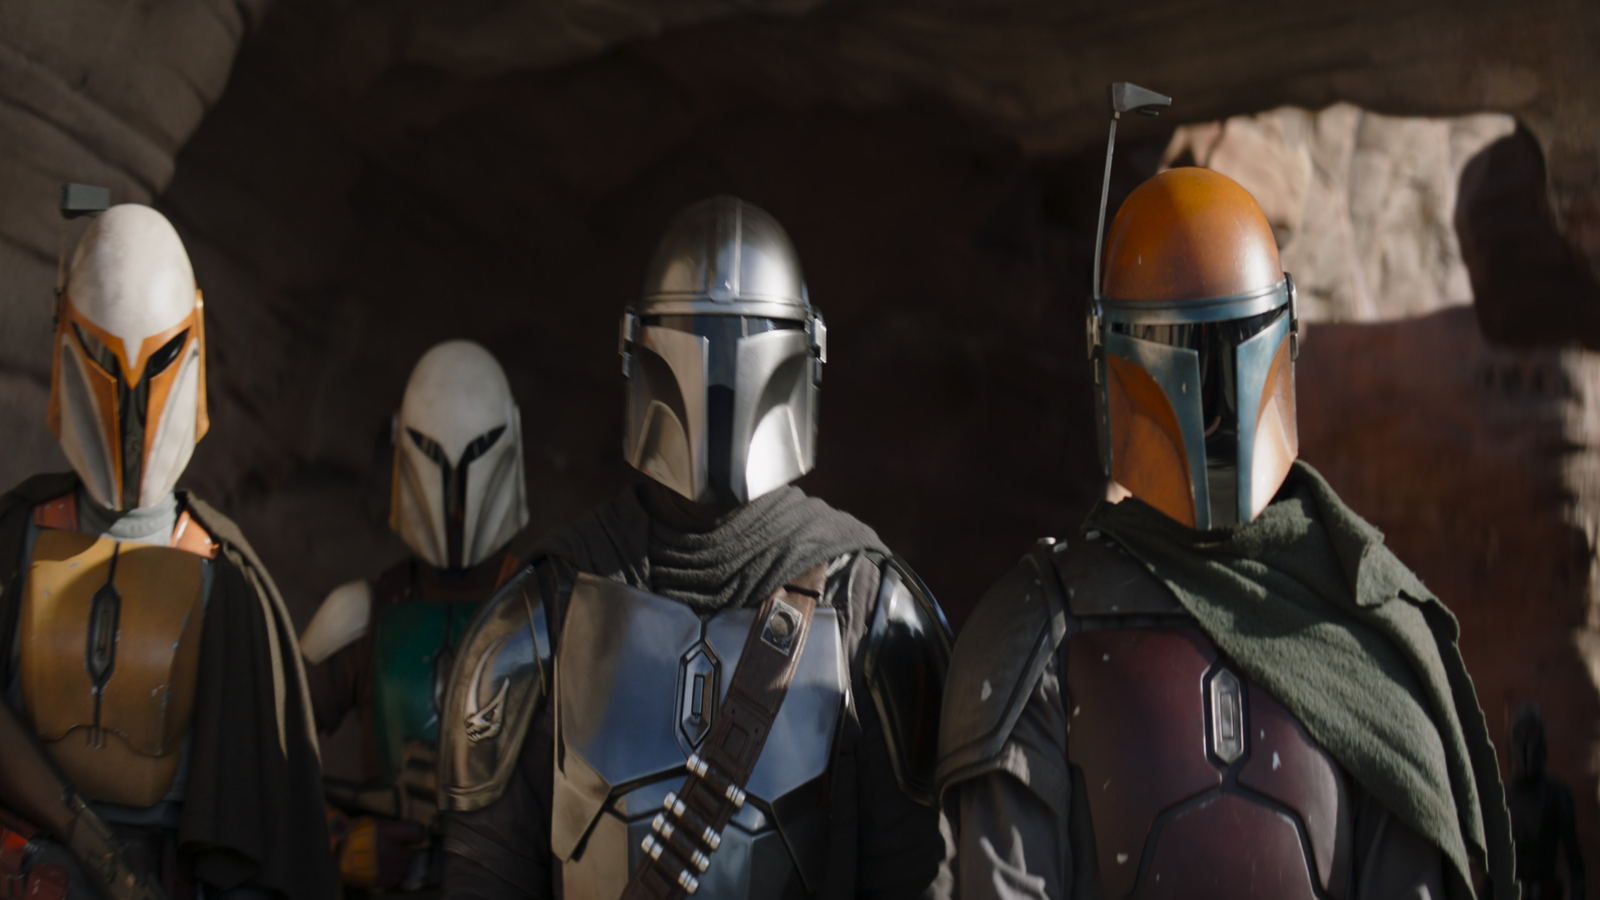 When Does 'The Mandalorian' Take Place in the 'Star Wars' Timeline?